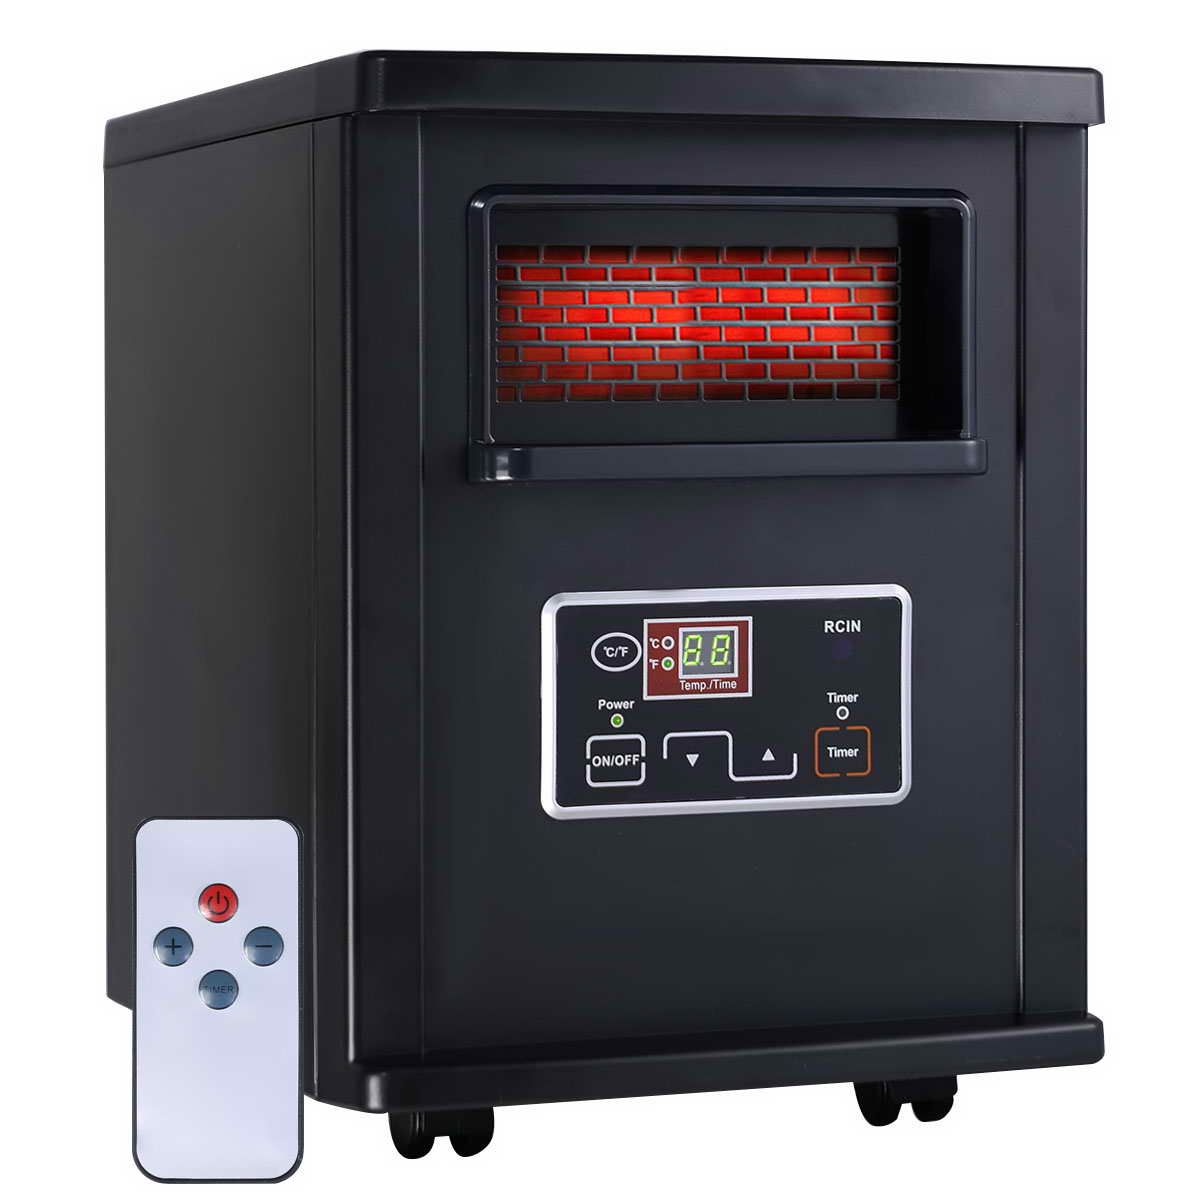 Topbuy 1500W Electric Room Heater Remote Control Portable Infrared Space Heating Machine w/ LED display